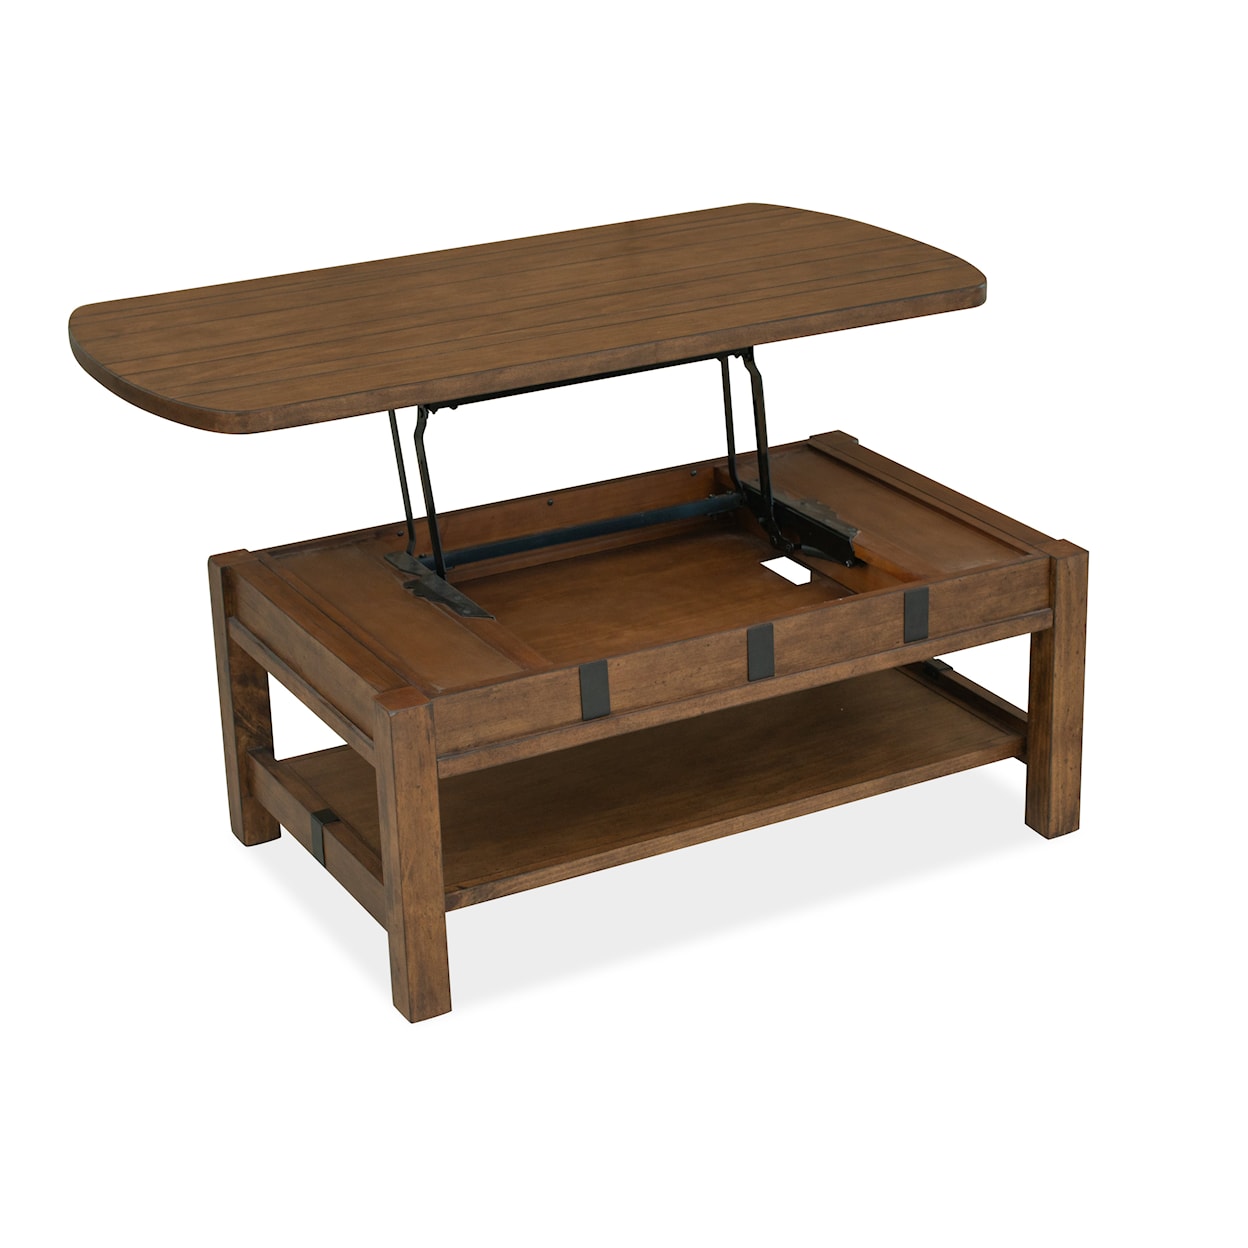 Magnussen Home Everdeen Occasional Tables Lift-Top Storage Cocktail Table